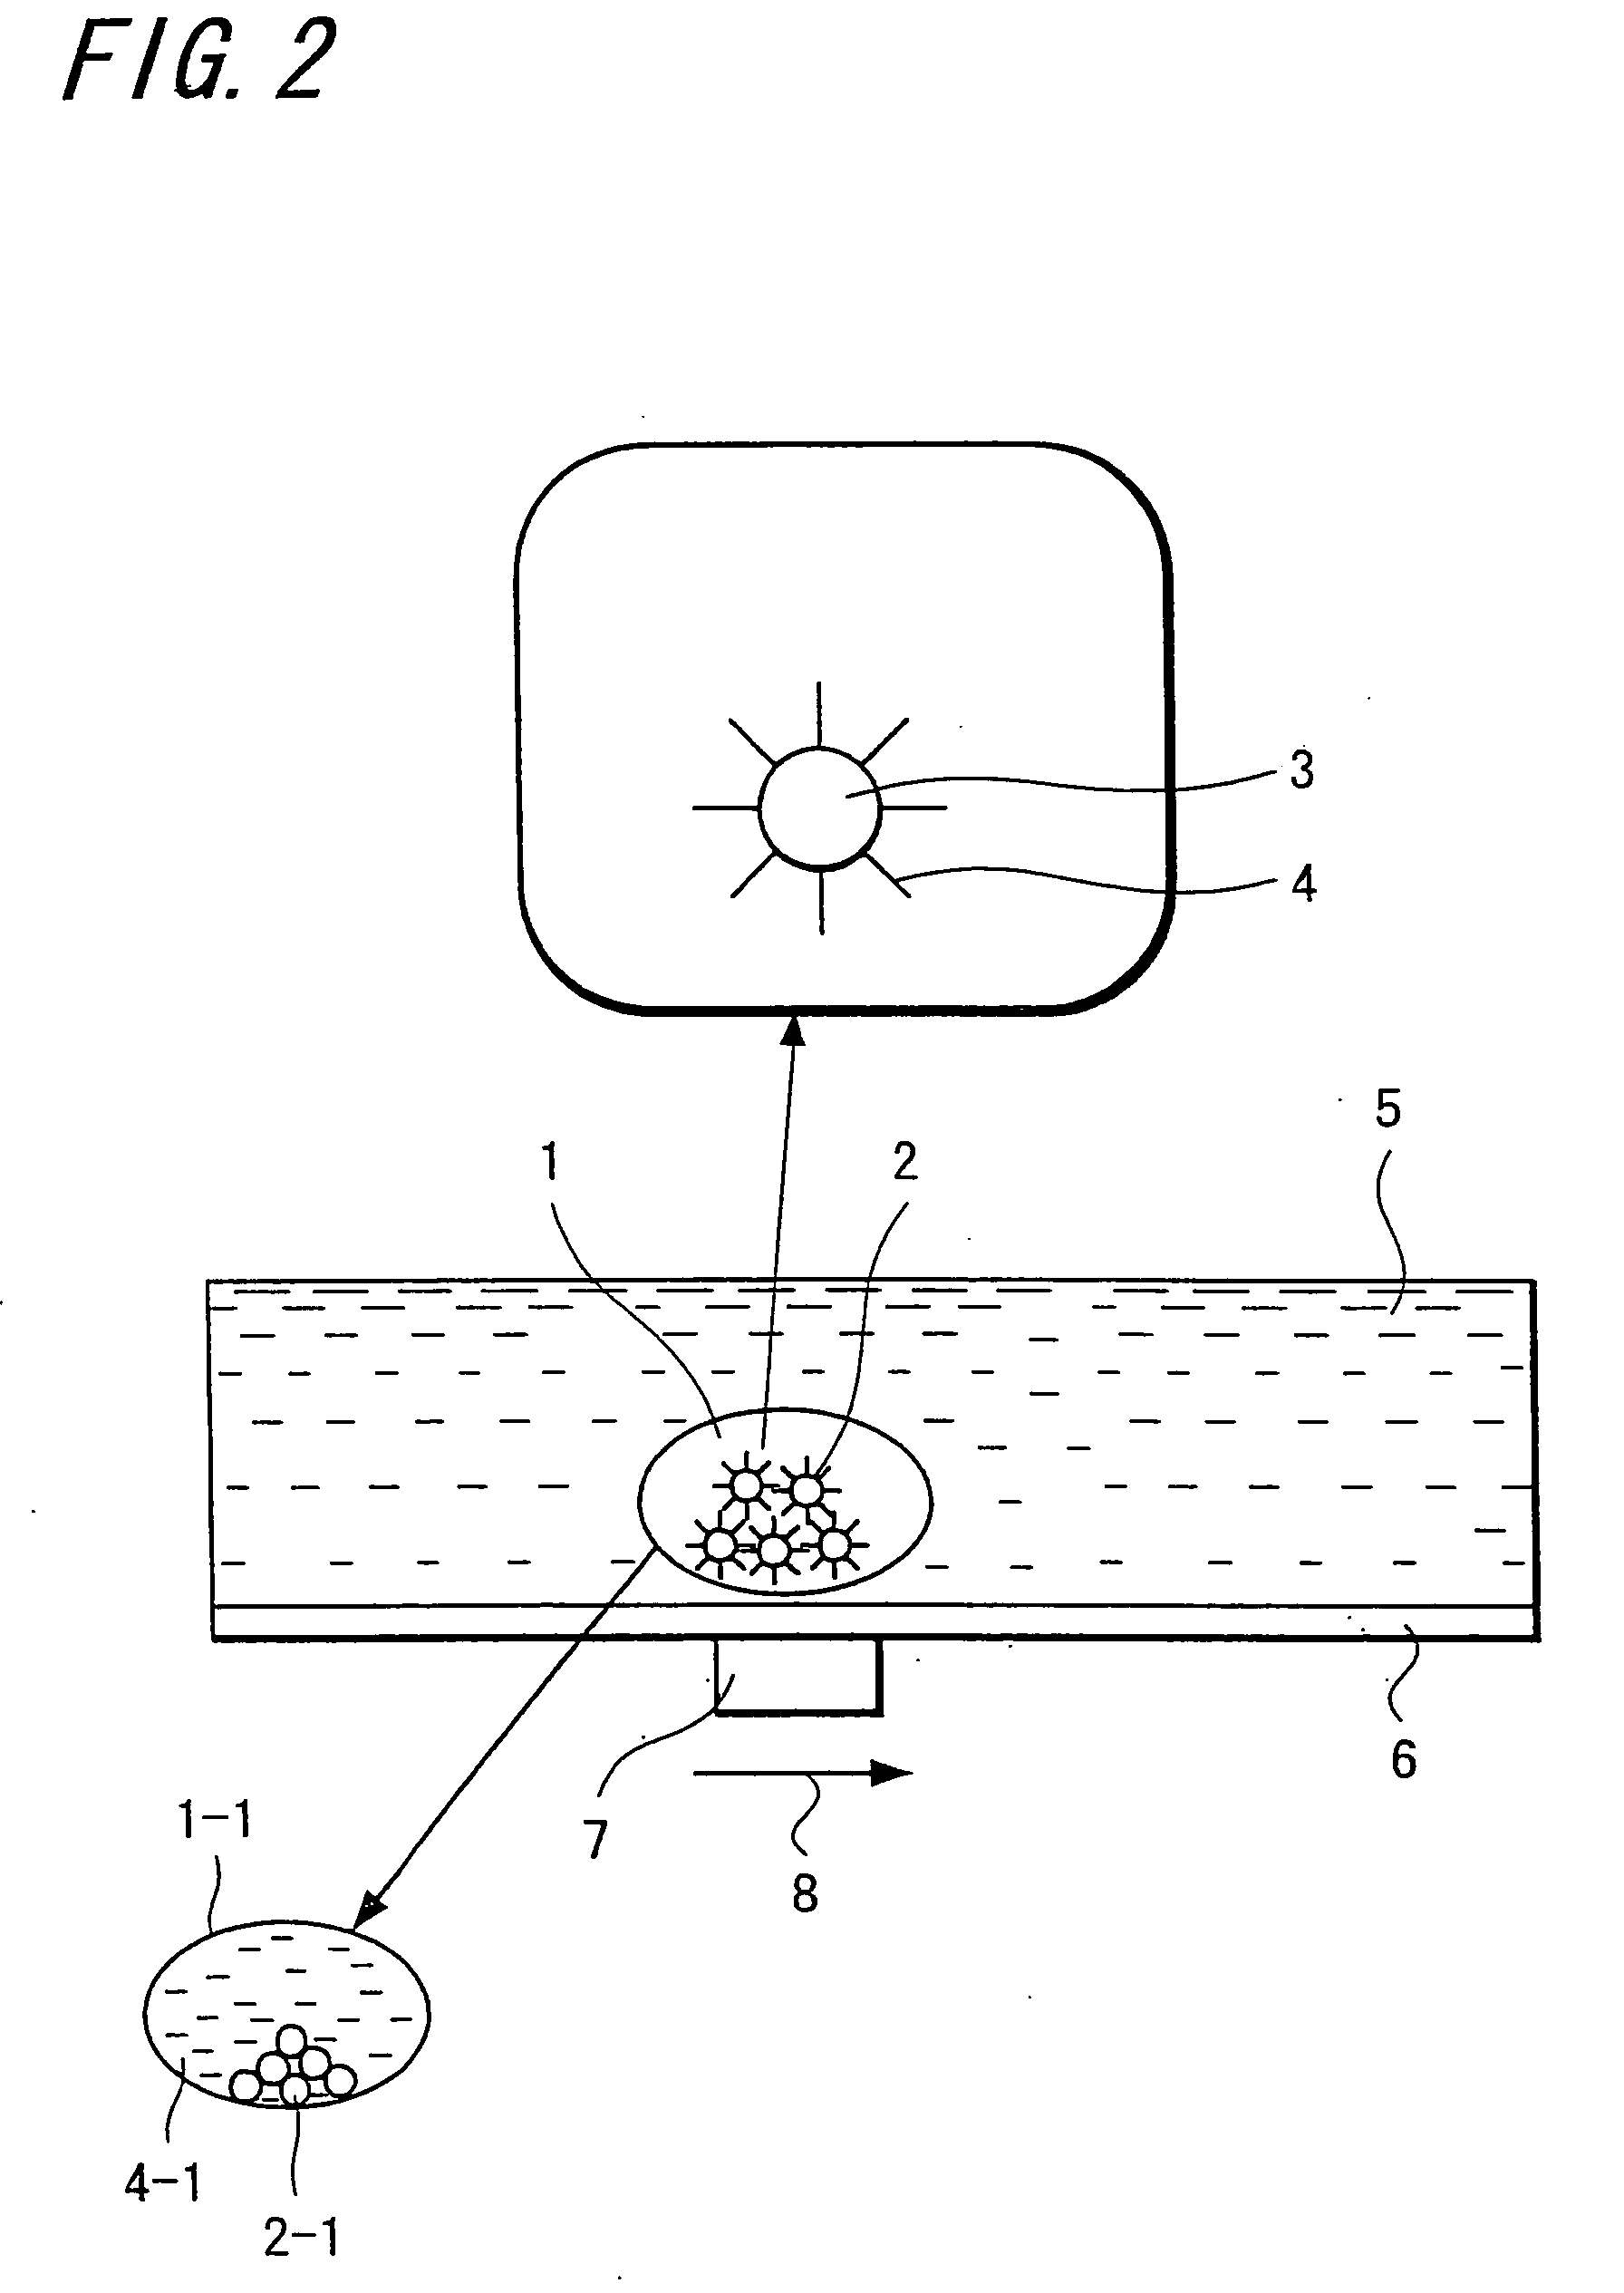 Chemical Analytic Apparatus and Chemical Analytic Method